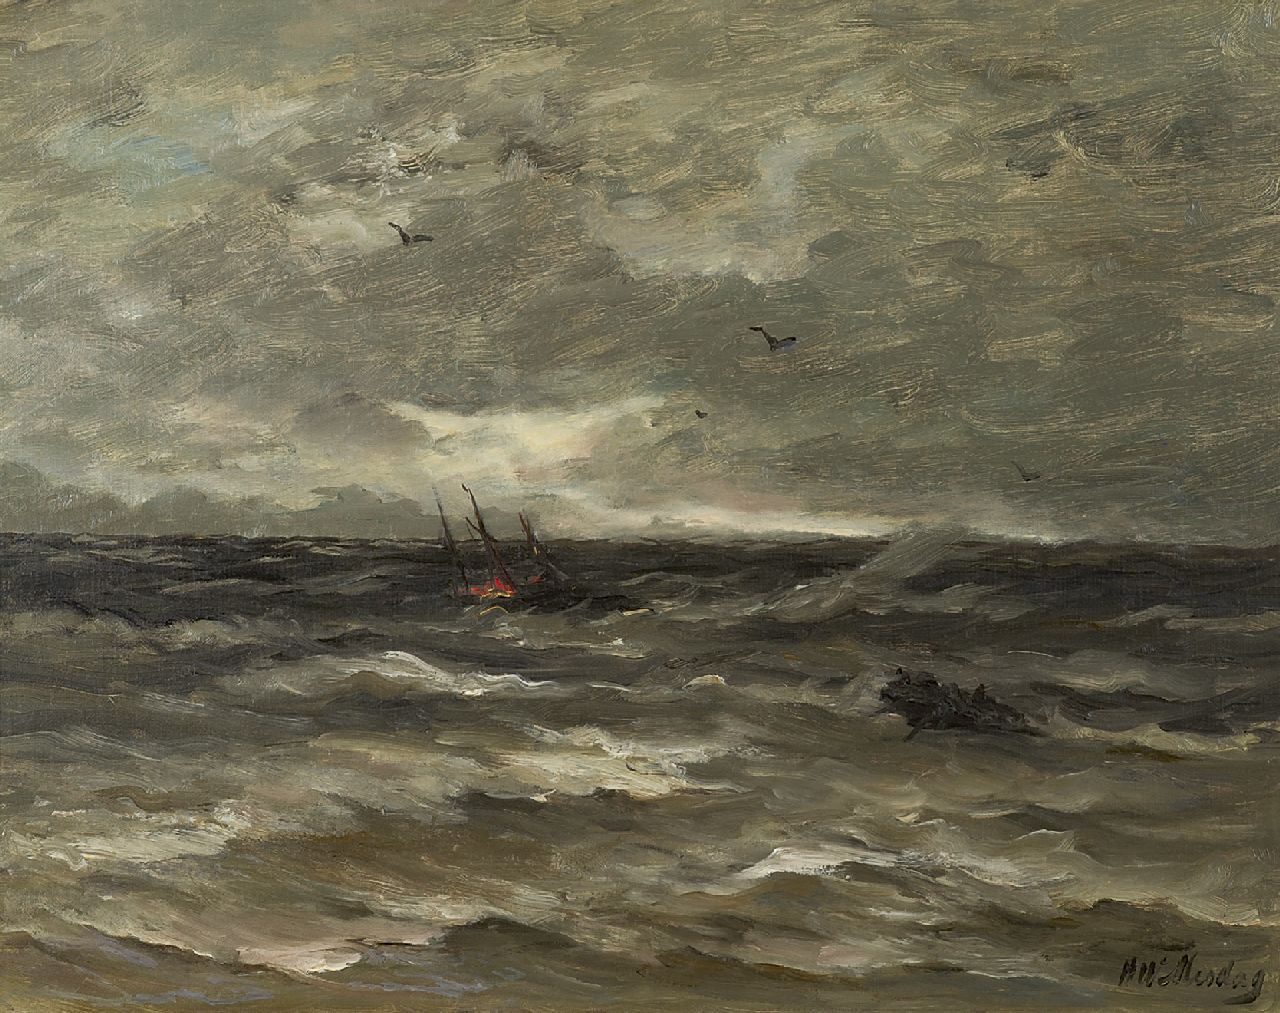 Mesdag H.W.  | Hendrik Willem Mesdag, A ship burning at sea, oil on canvas 40.0 x 50.0 cm, signed l.r.